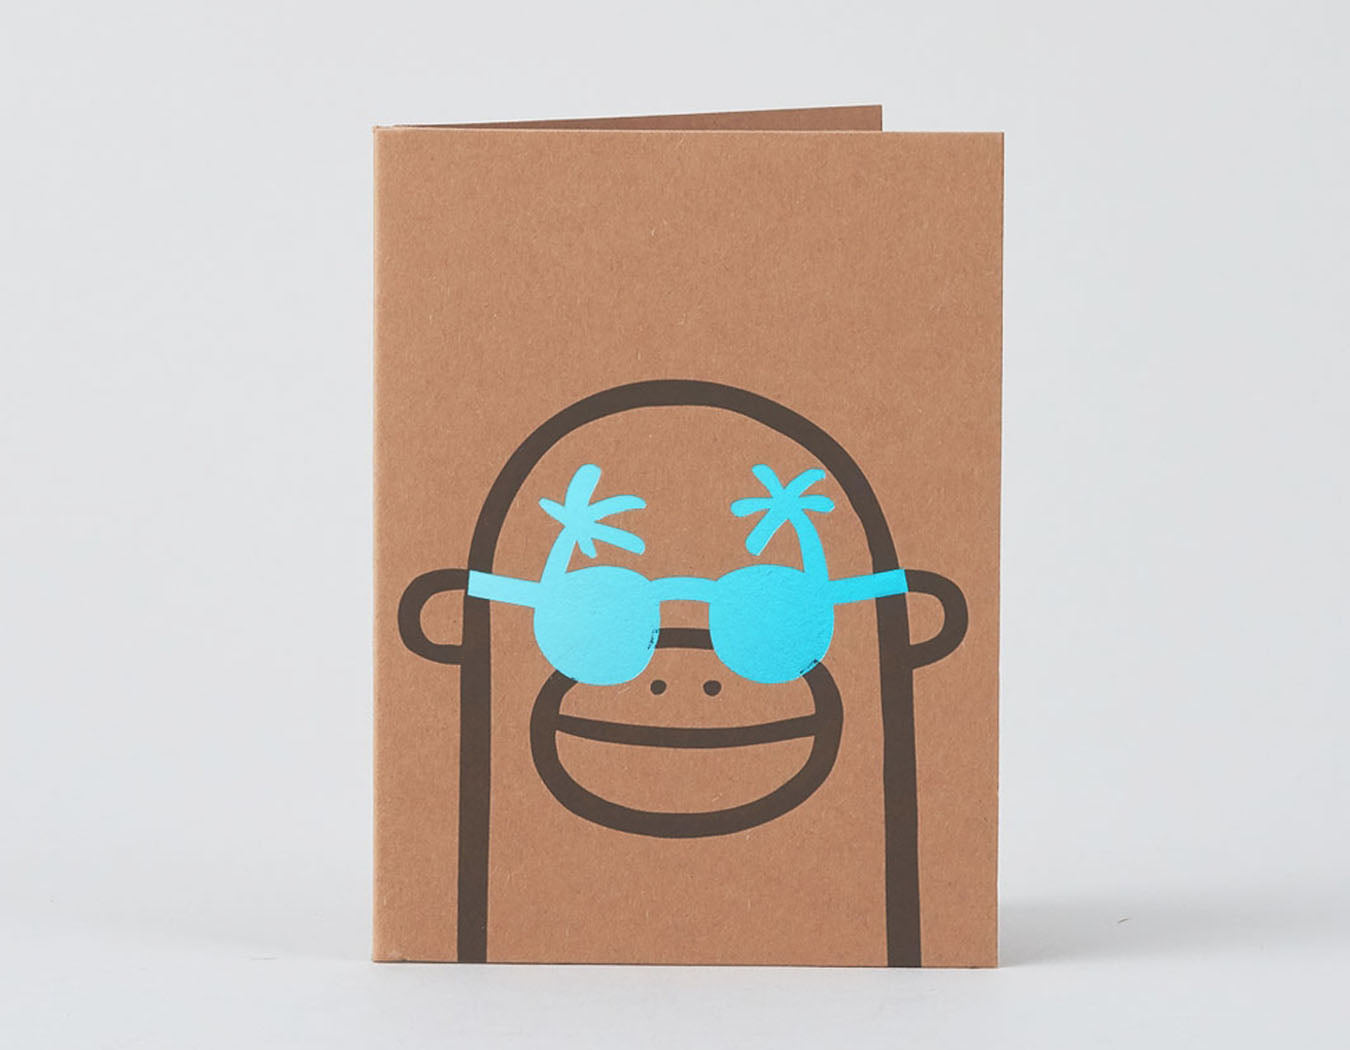 monkey smiling with gold foil blue sunglasses